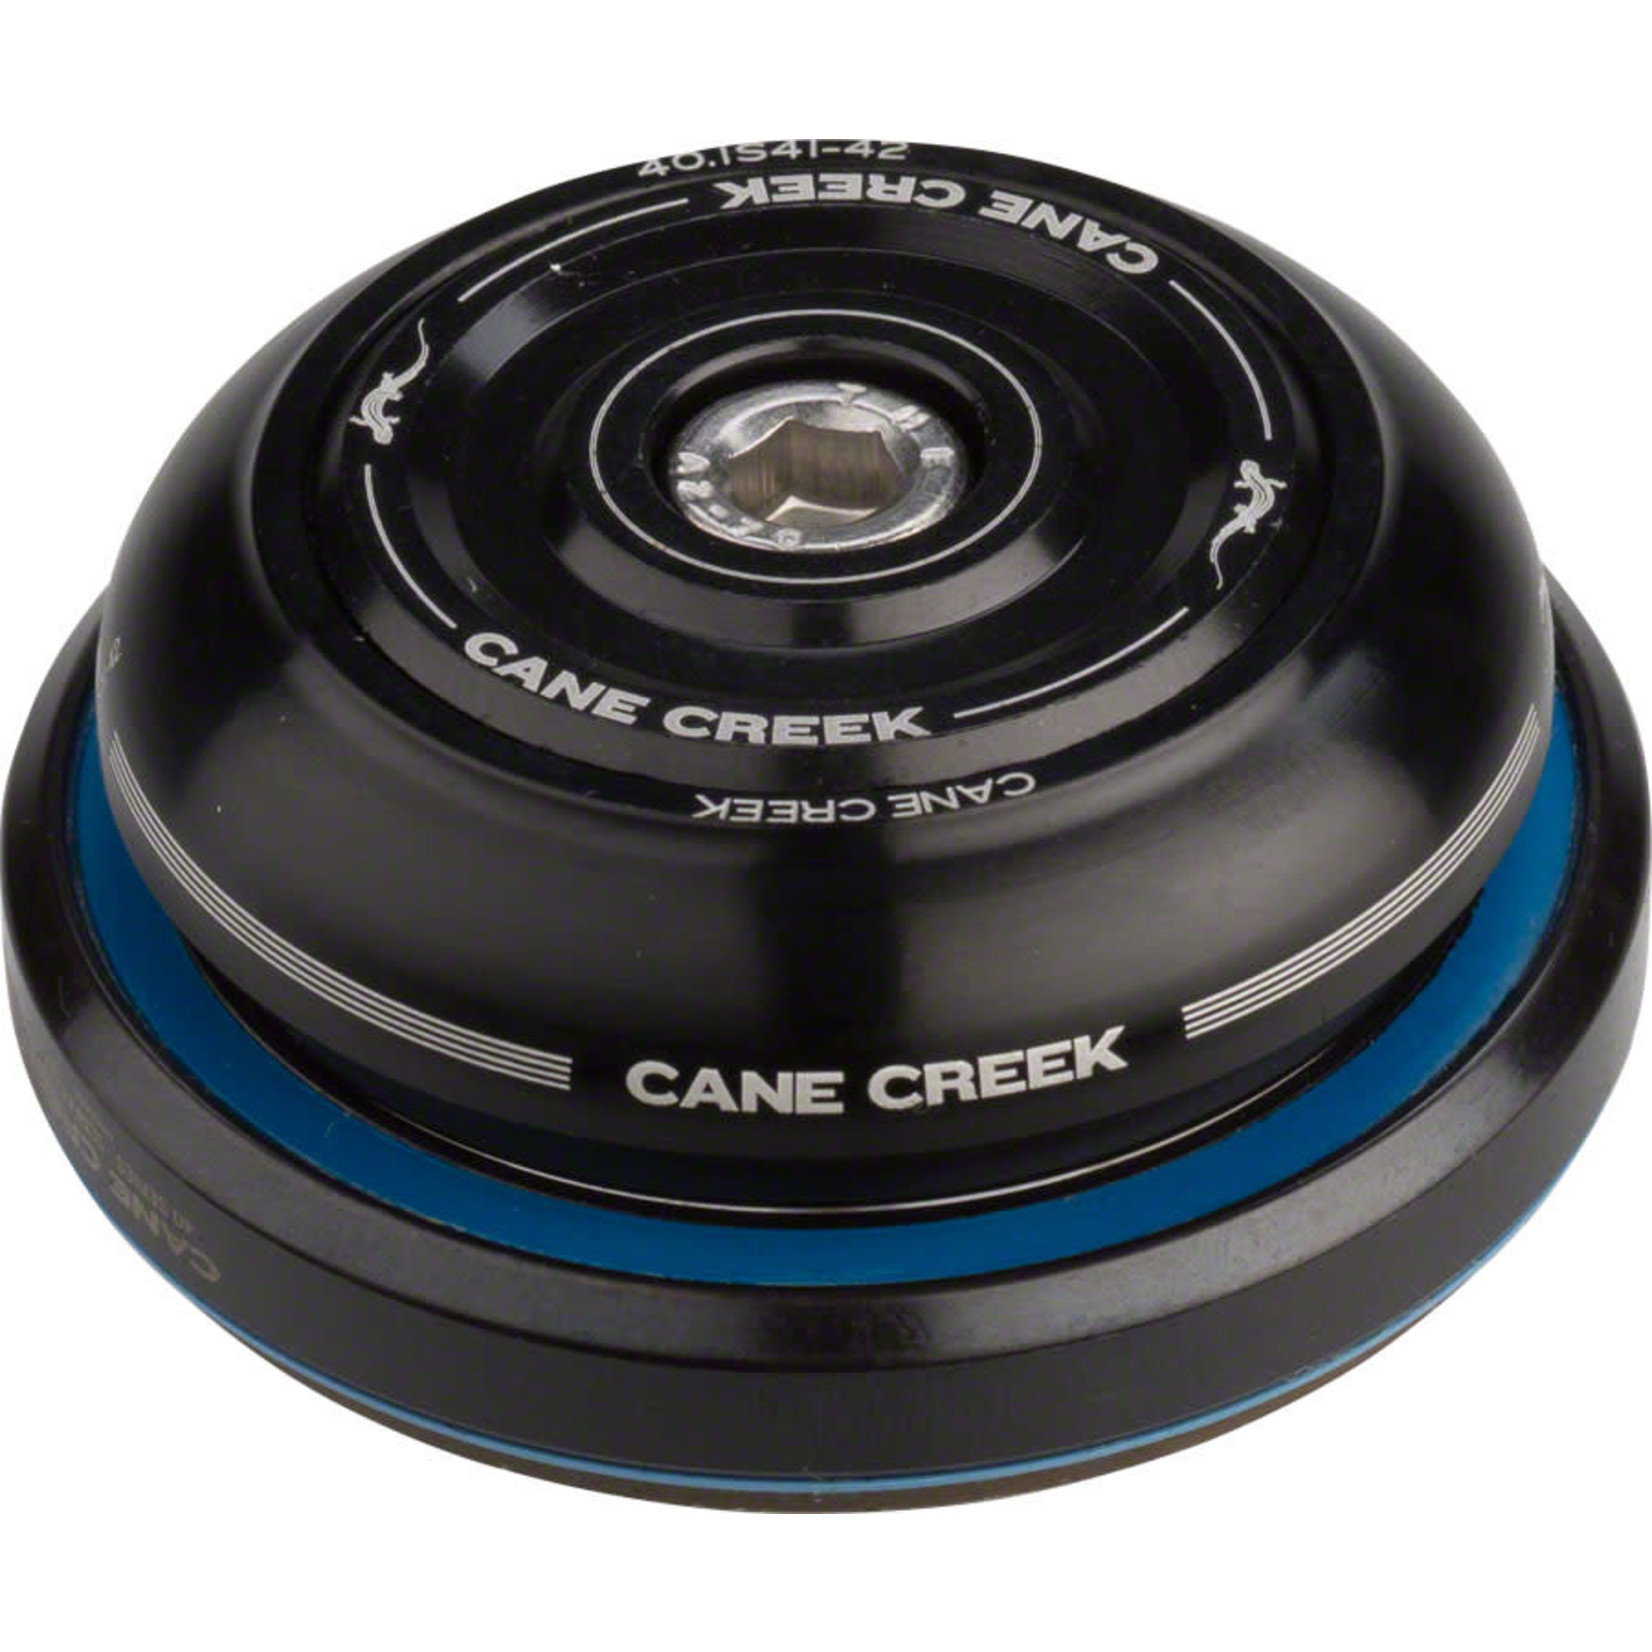 Cane Creek Cane Creek 40 IS41/28.6 IS52/40 Short Cover Headset, Black